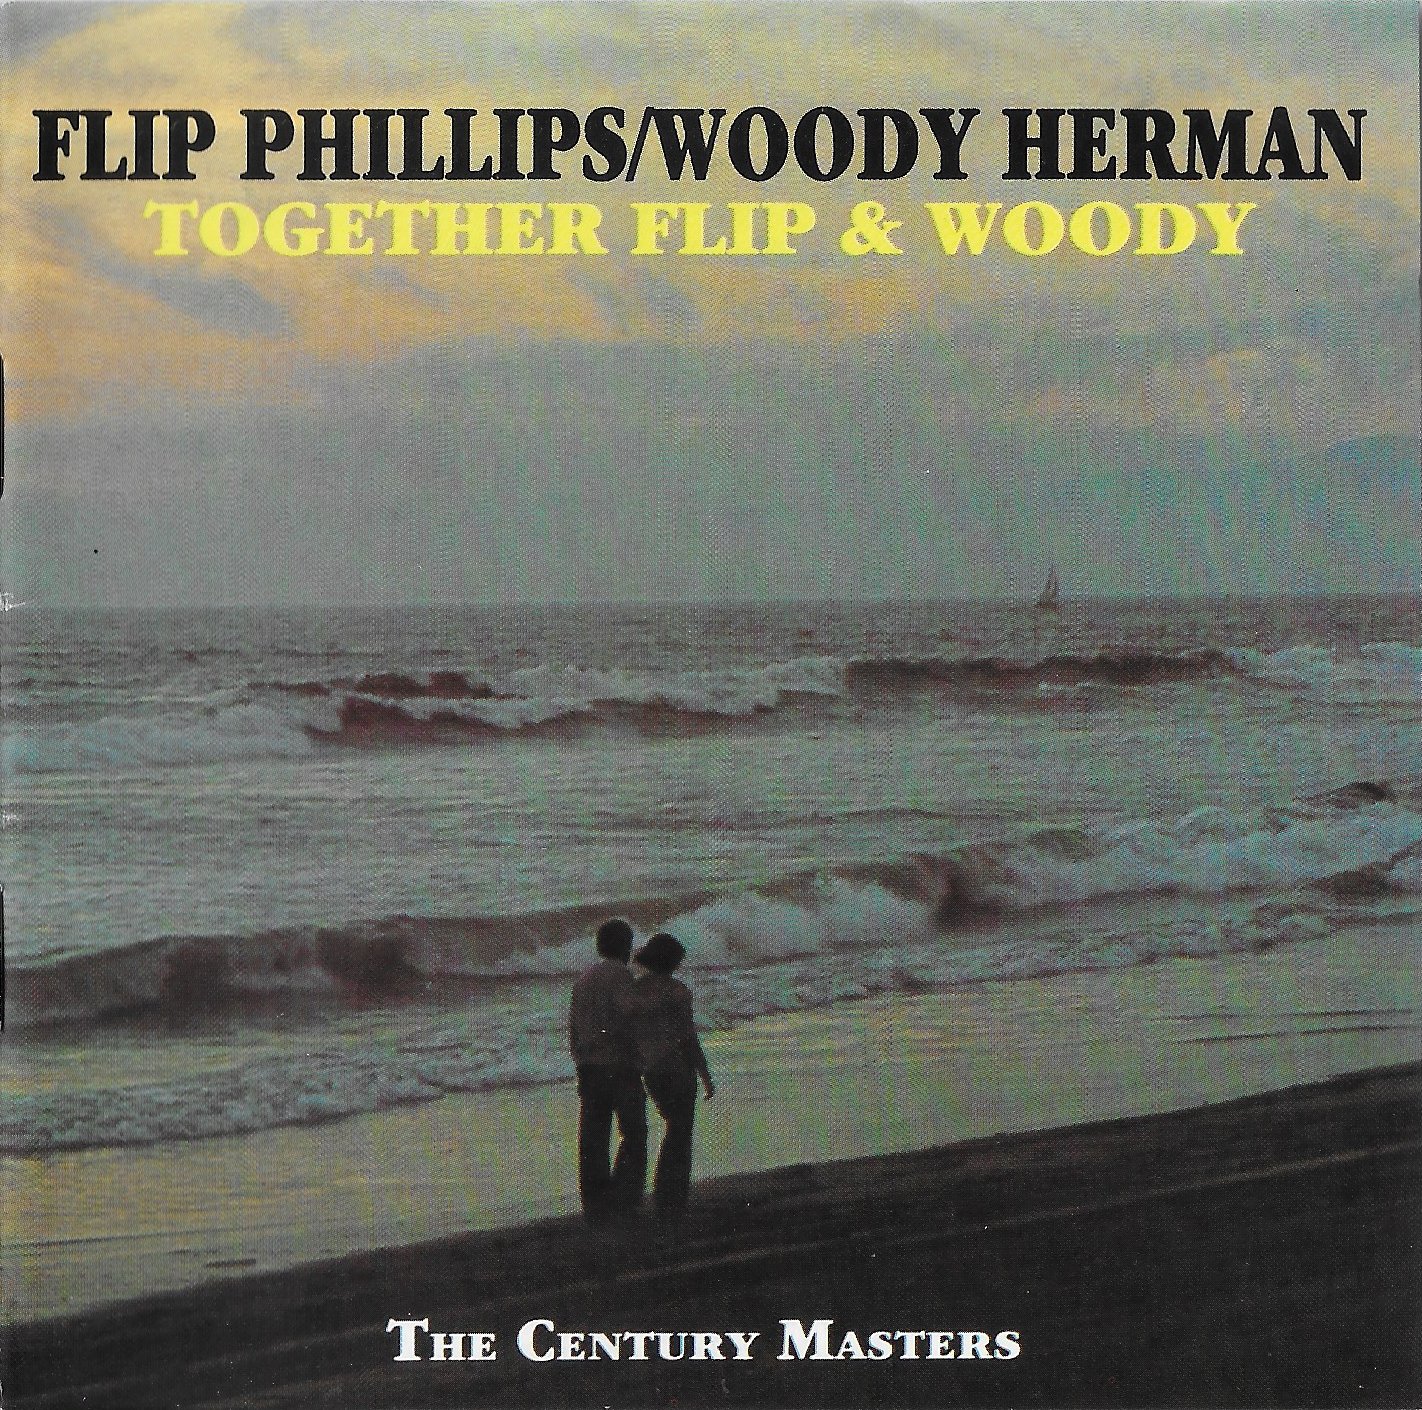 Picture of CJCD 828 The Century Catalogue - Together Flip & Woody - Flip Phillips / Woody Herman by artist Flip Phillips / Woody Herman from the BBC cds - Records and Tapes library